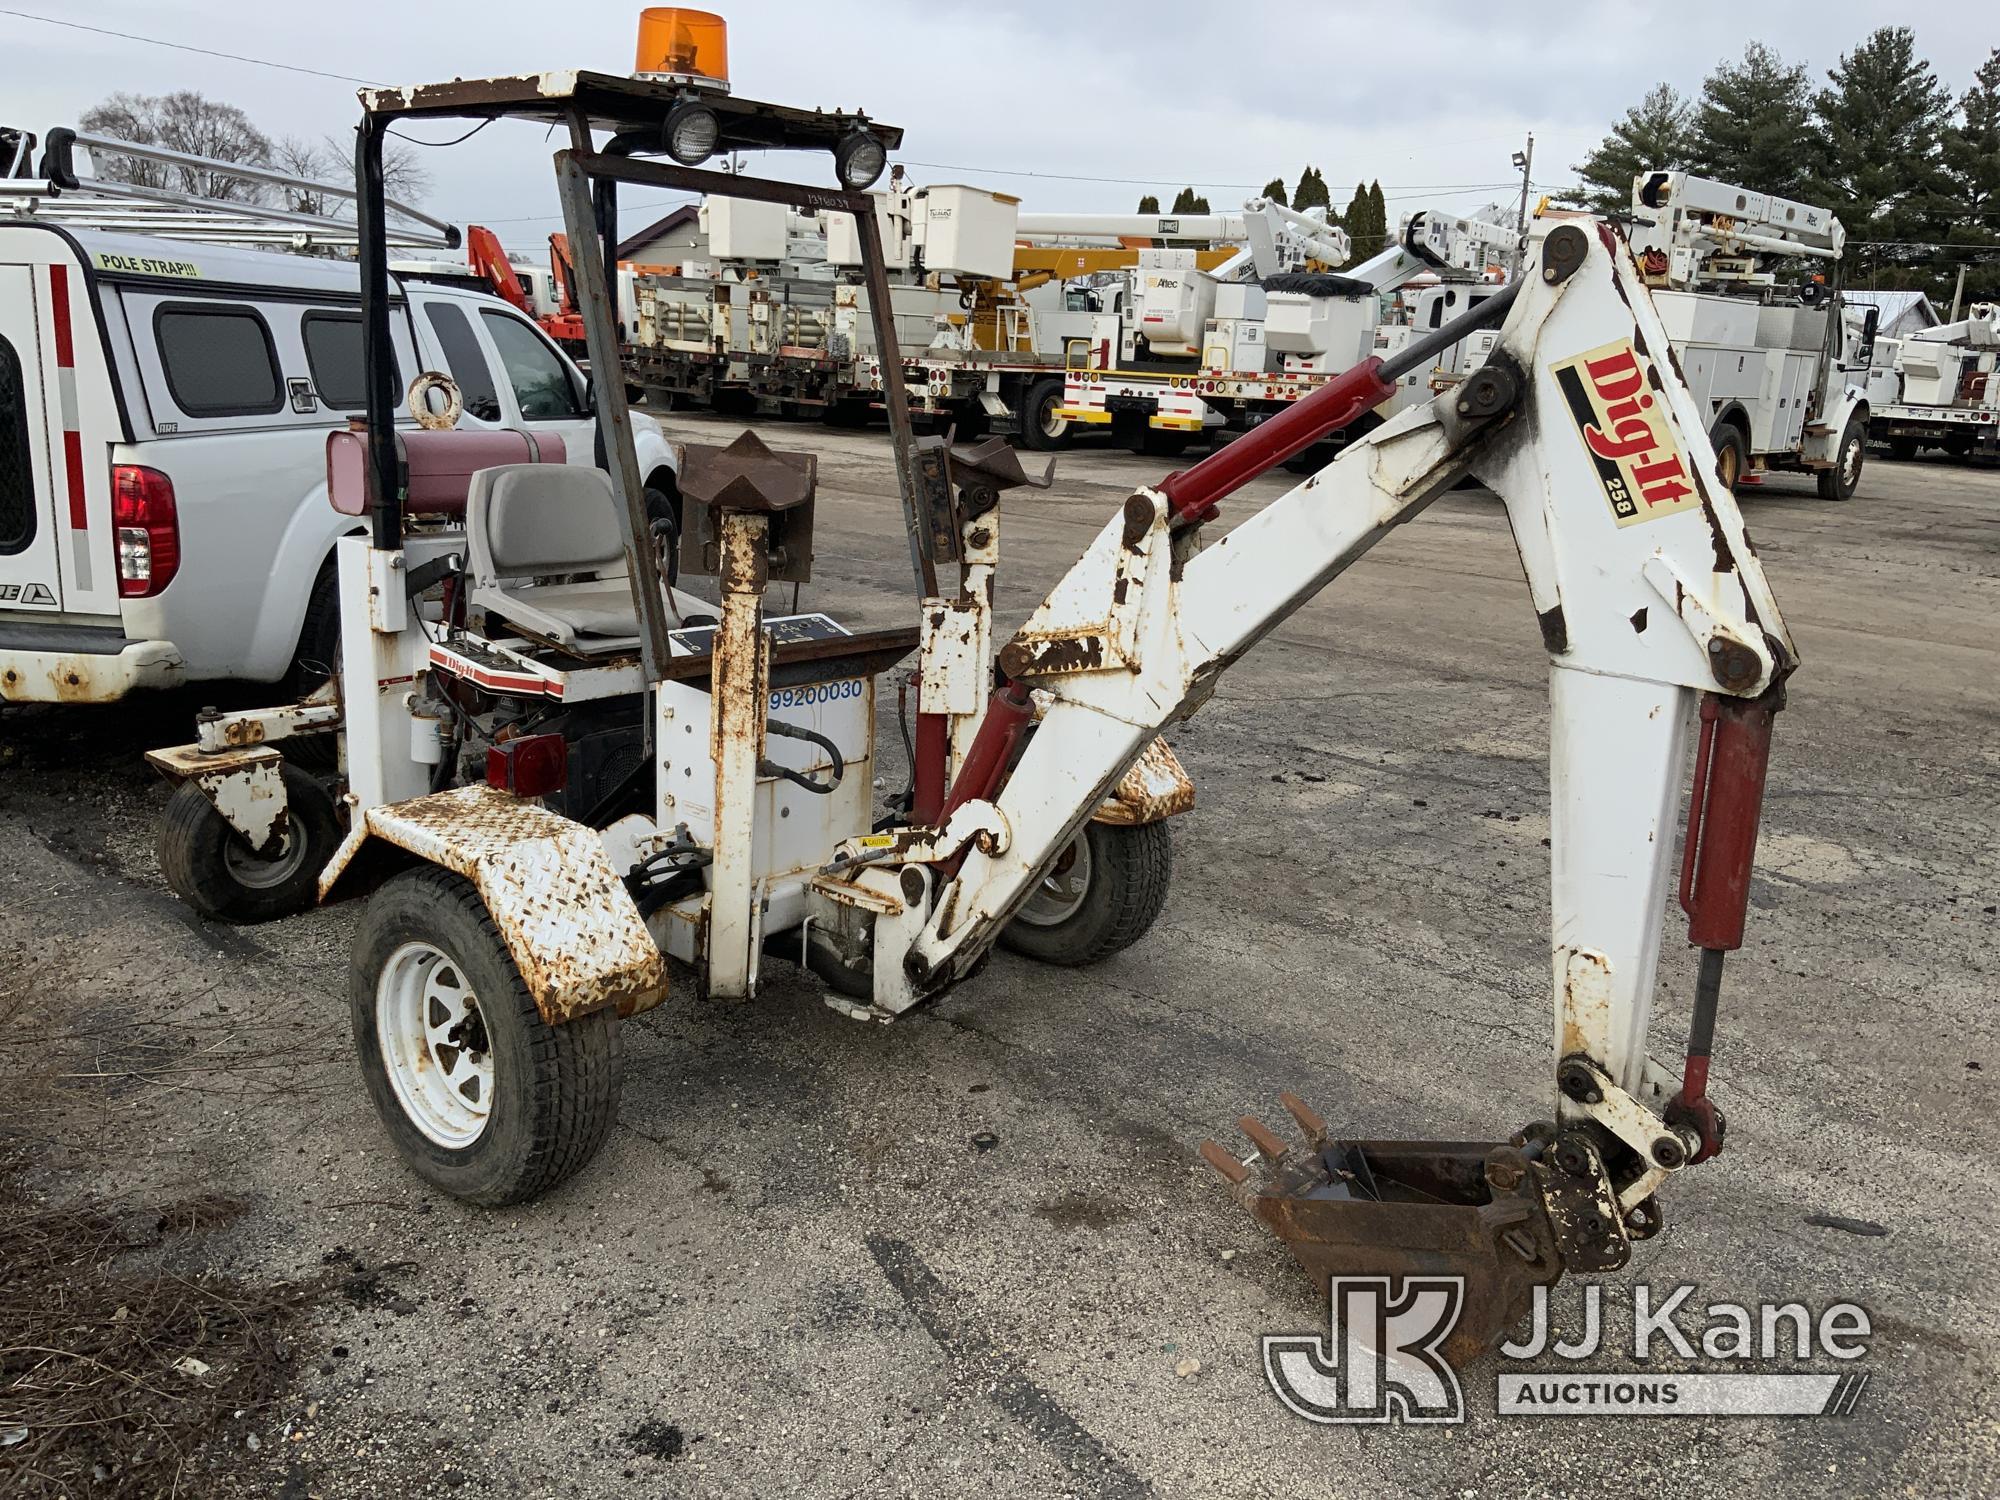 (South Beloit, IL) 2000 Dig-It 258 Mobile Tool 70030 Portable Backhoe Not Running, Condition Unknown